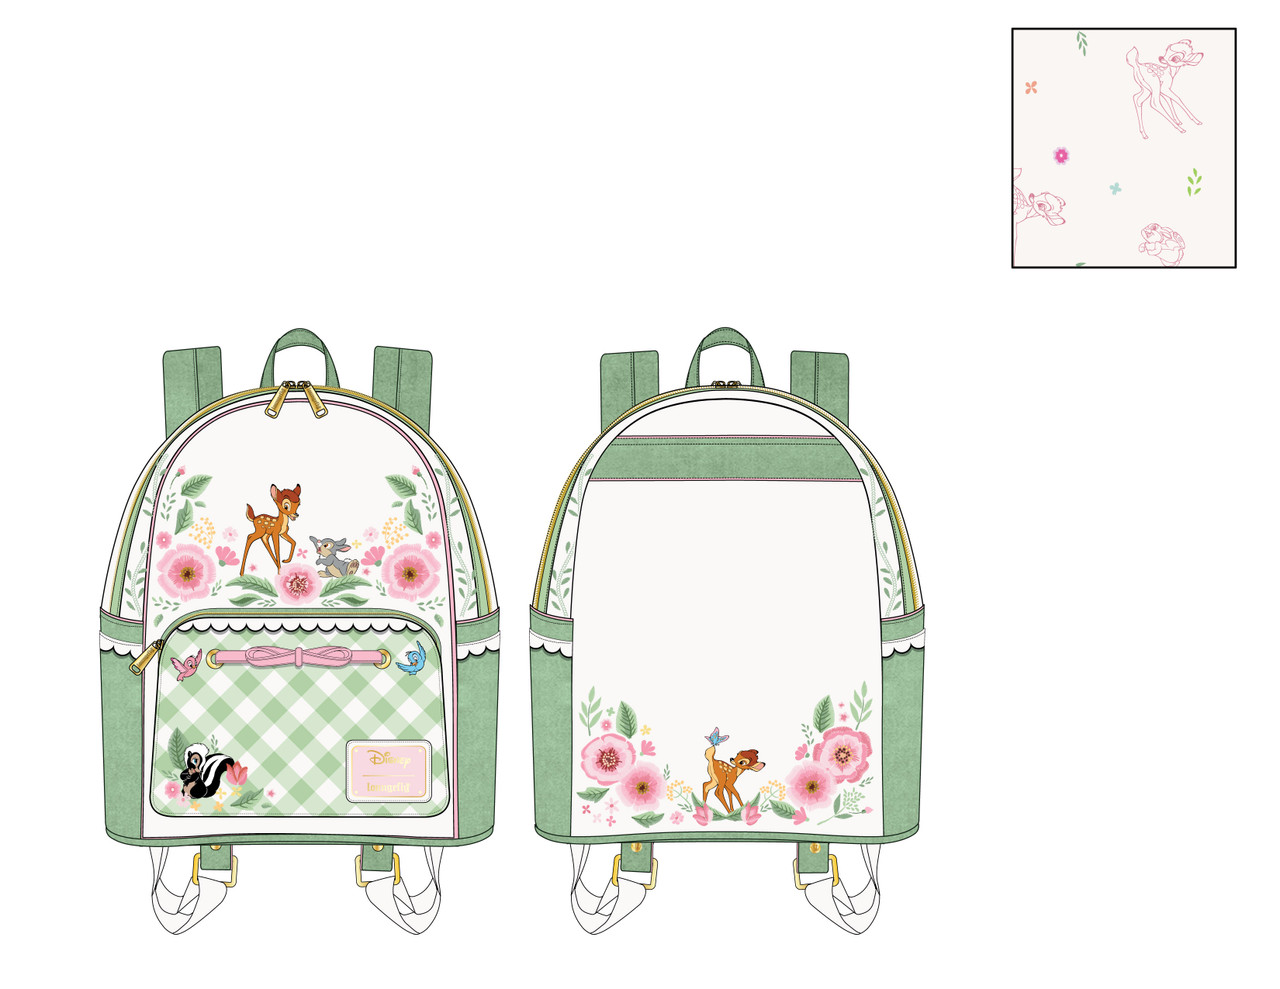 Bambi: Spring Time Gingham Loungefly Mini Backpack